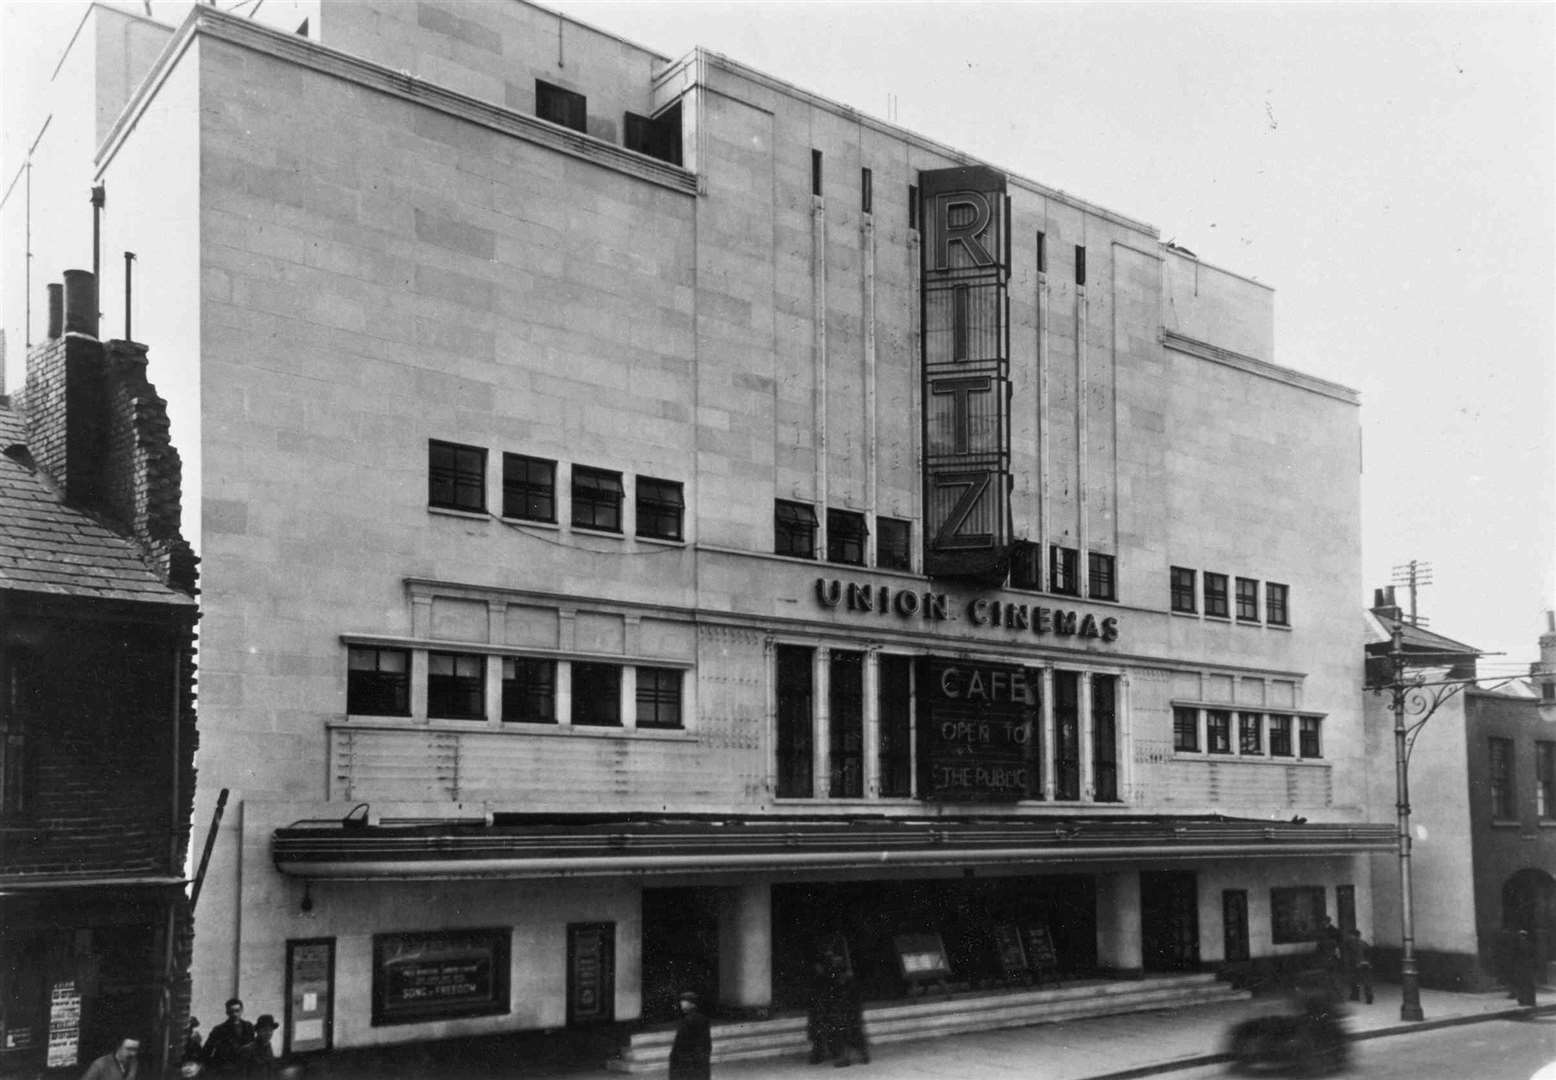 The Ritz cinema in Chatham opened in 1937 and was eventually closed in 1972 and converted to a bingo hall